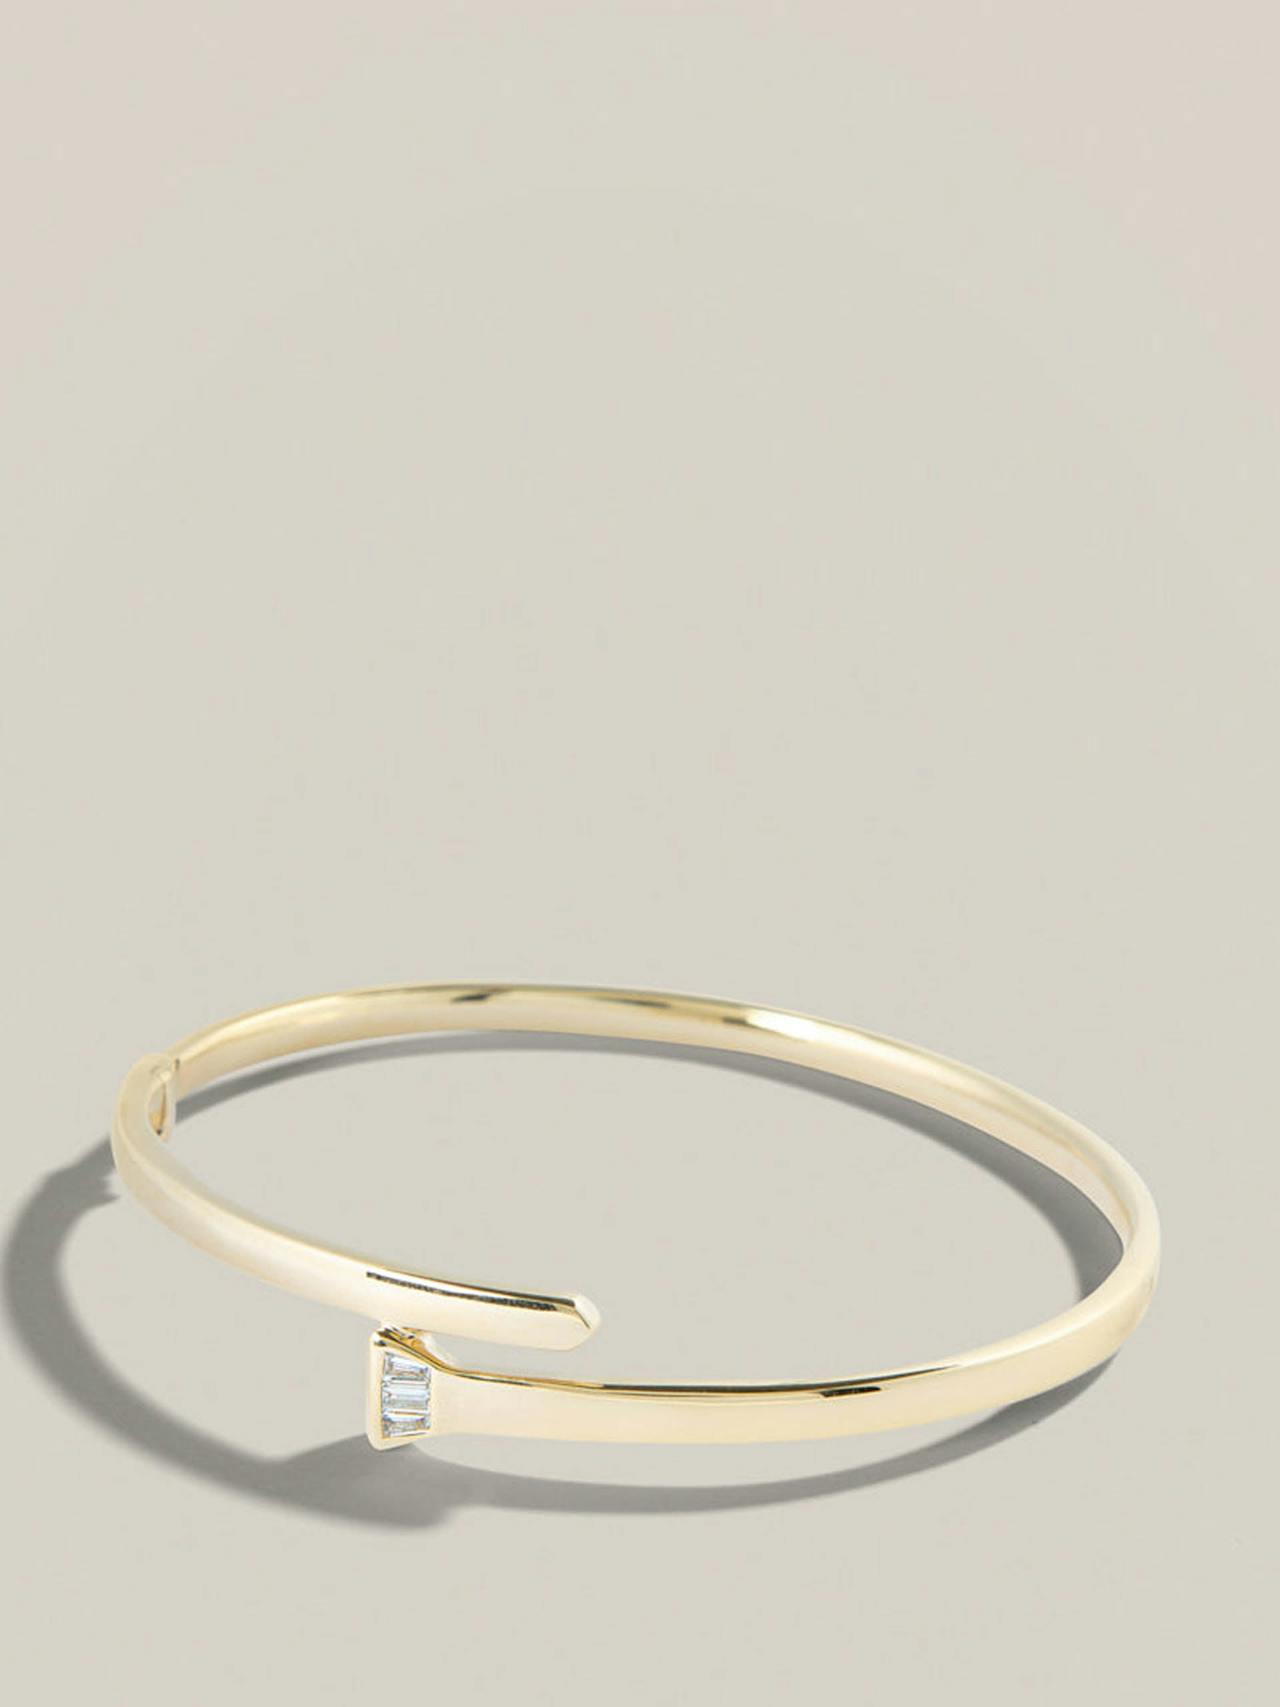 The Lucky One gold and diamond bangle